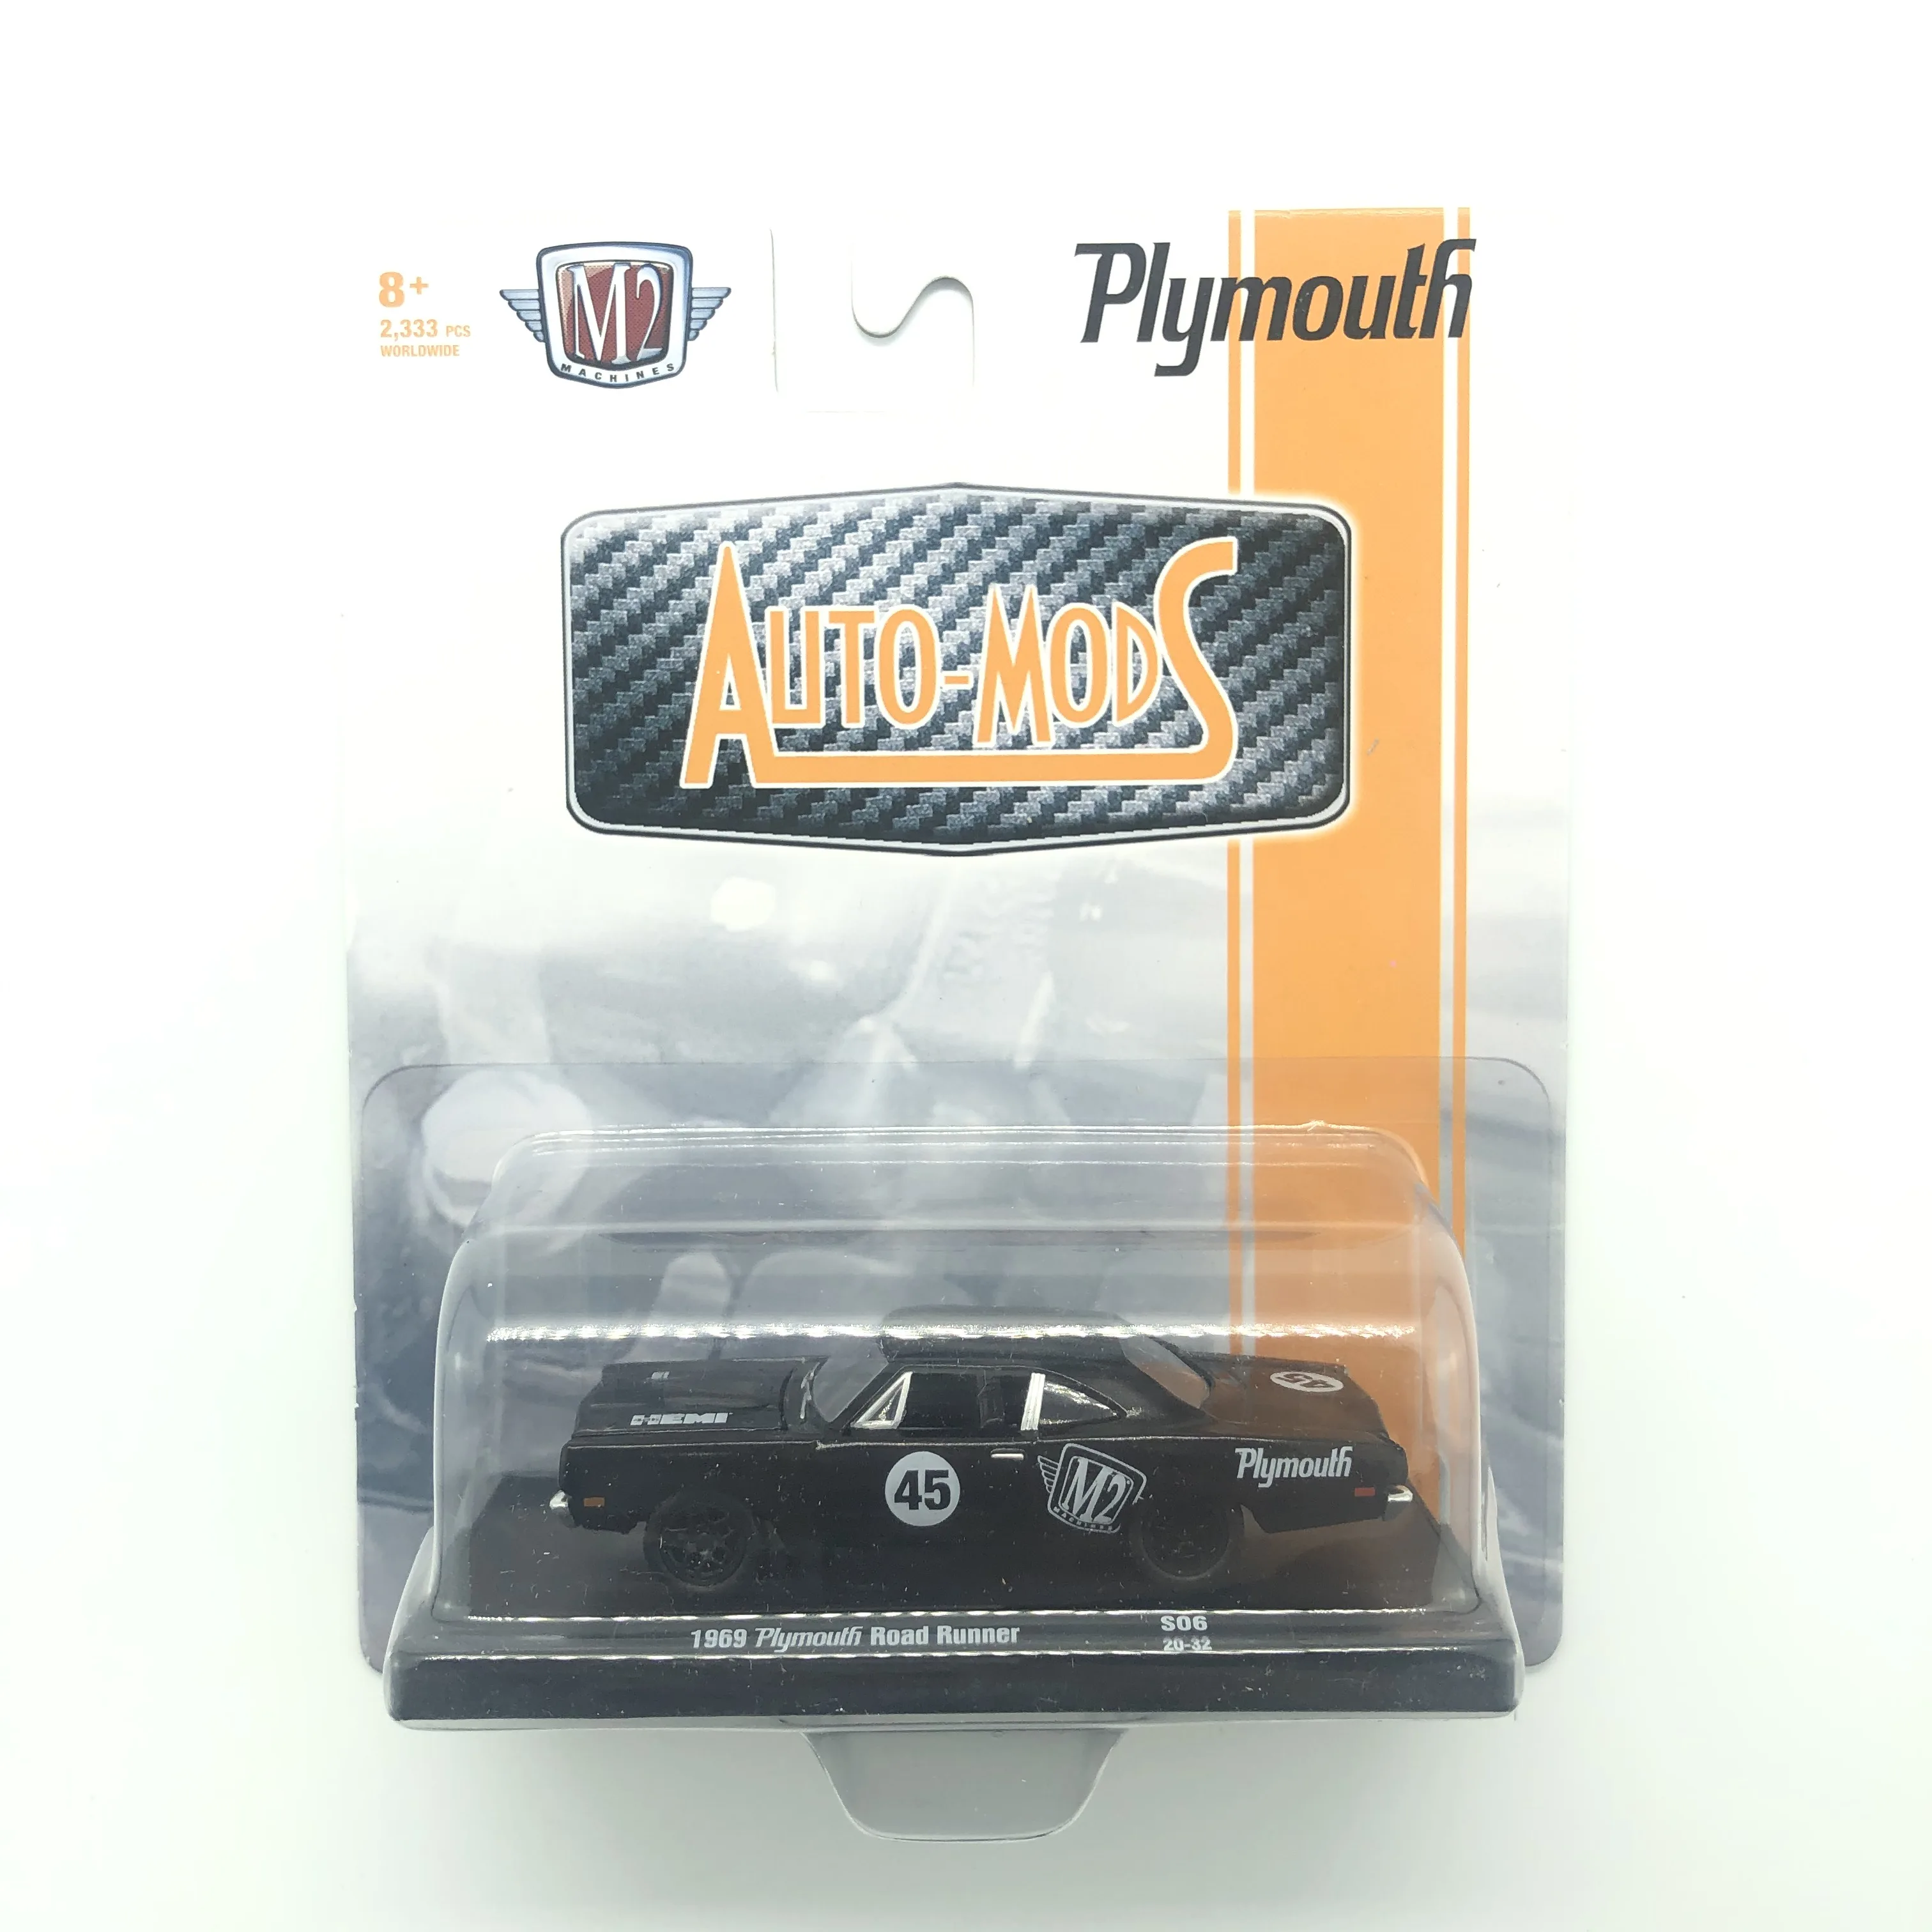 

NEW M2 Machines 1:64 1969 Plymouth Road Runner auto-mods #45 Diecast Model limited 2333 Collection Simulation Toys